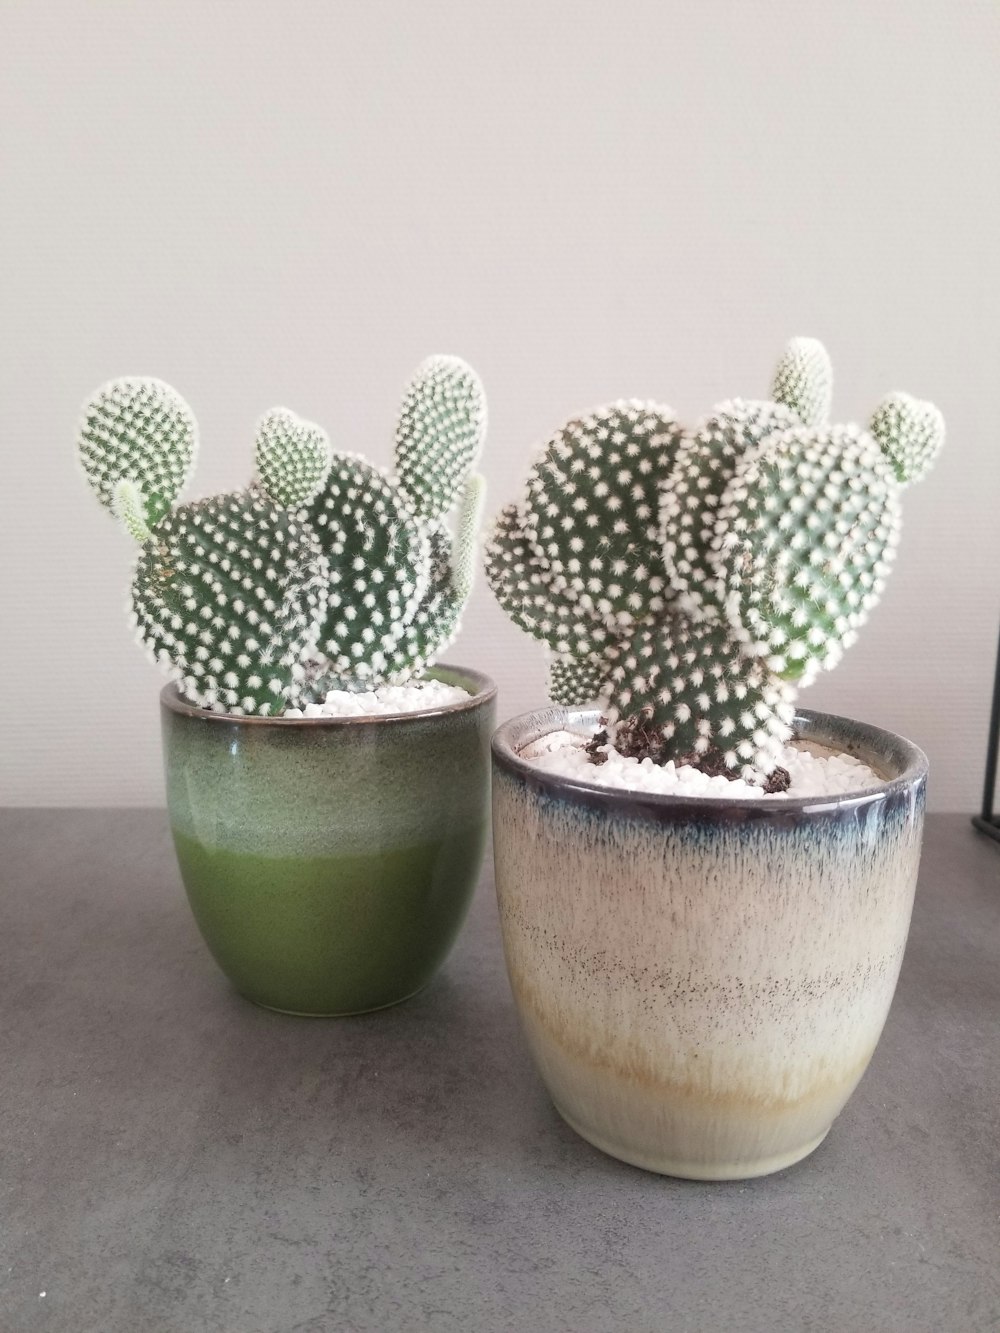 green cactus in brown clay pot